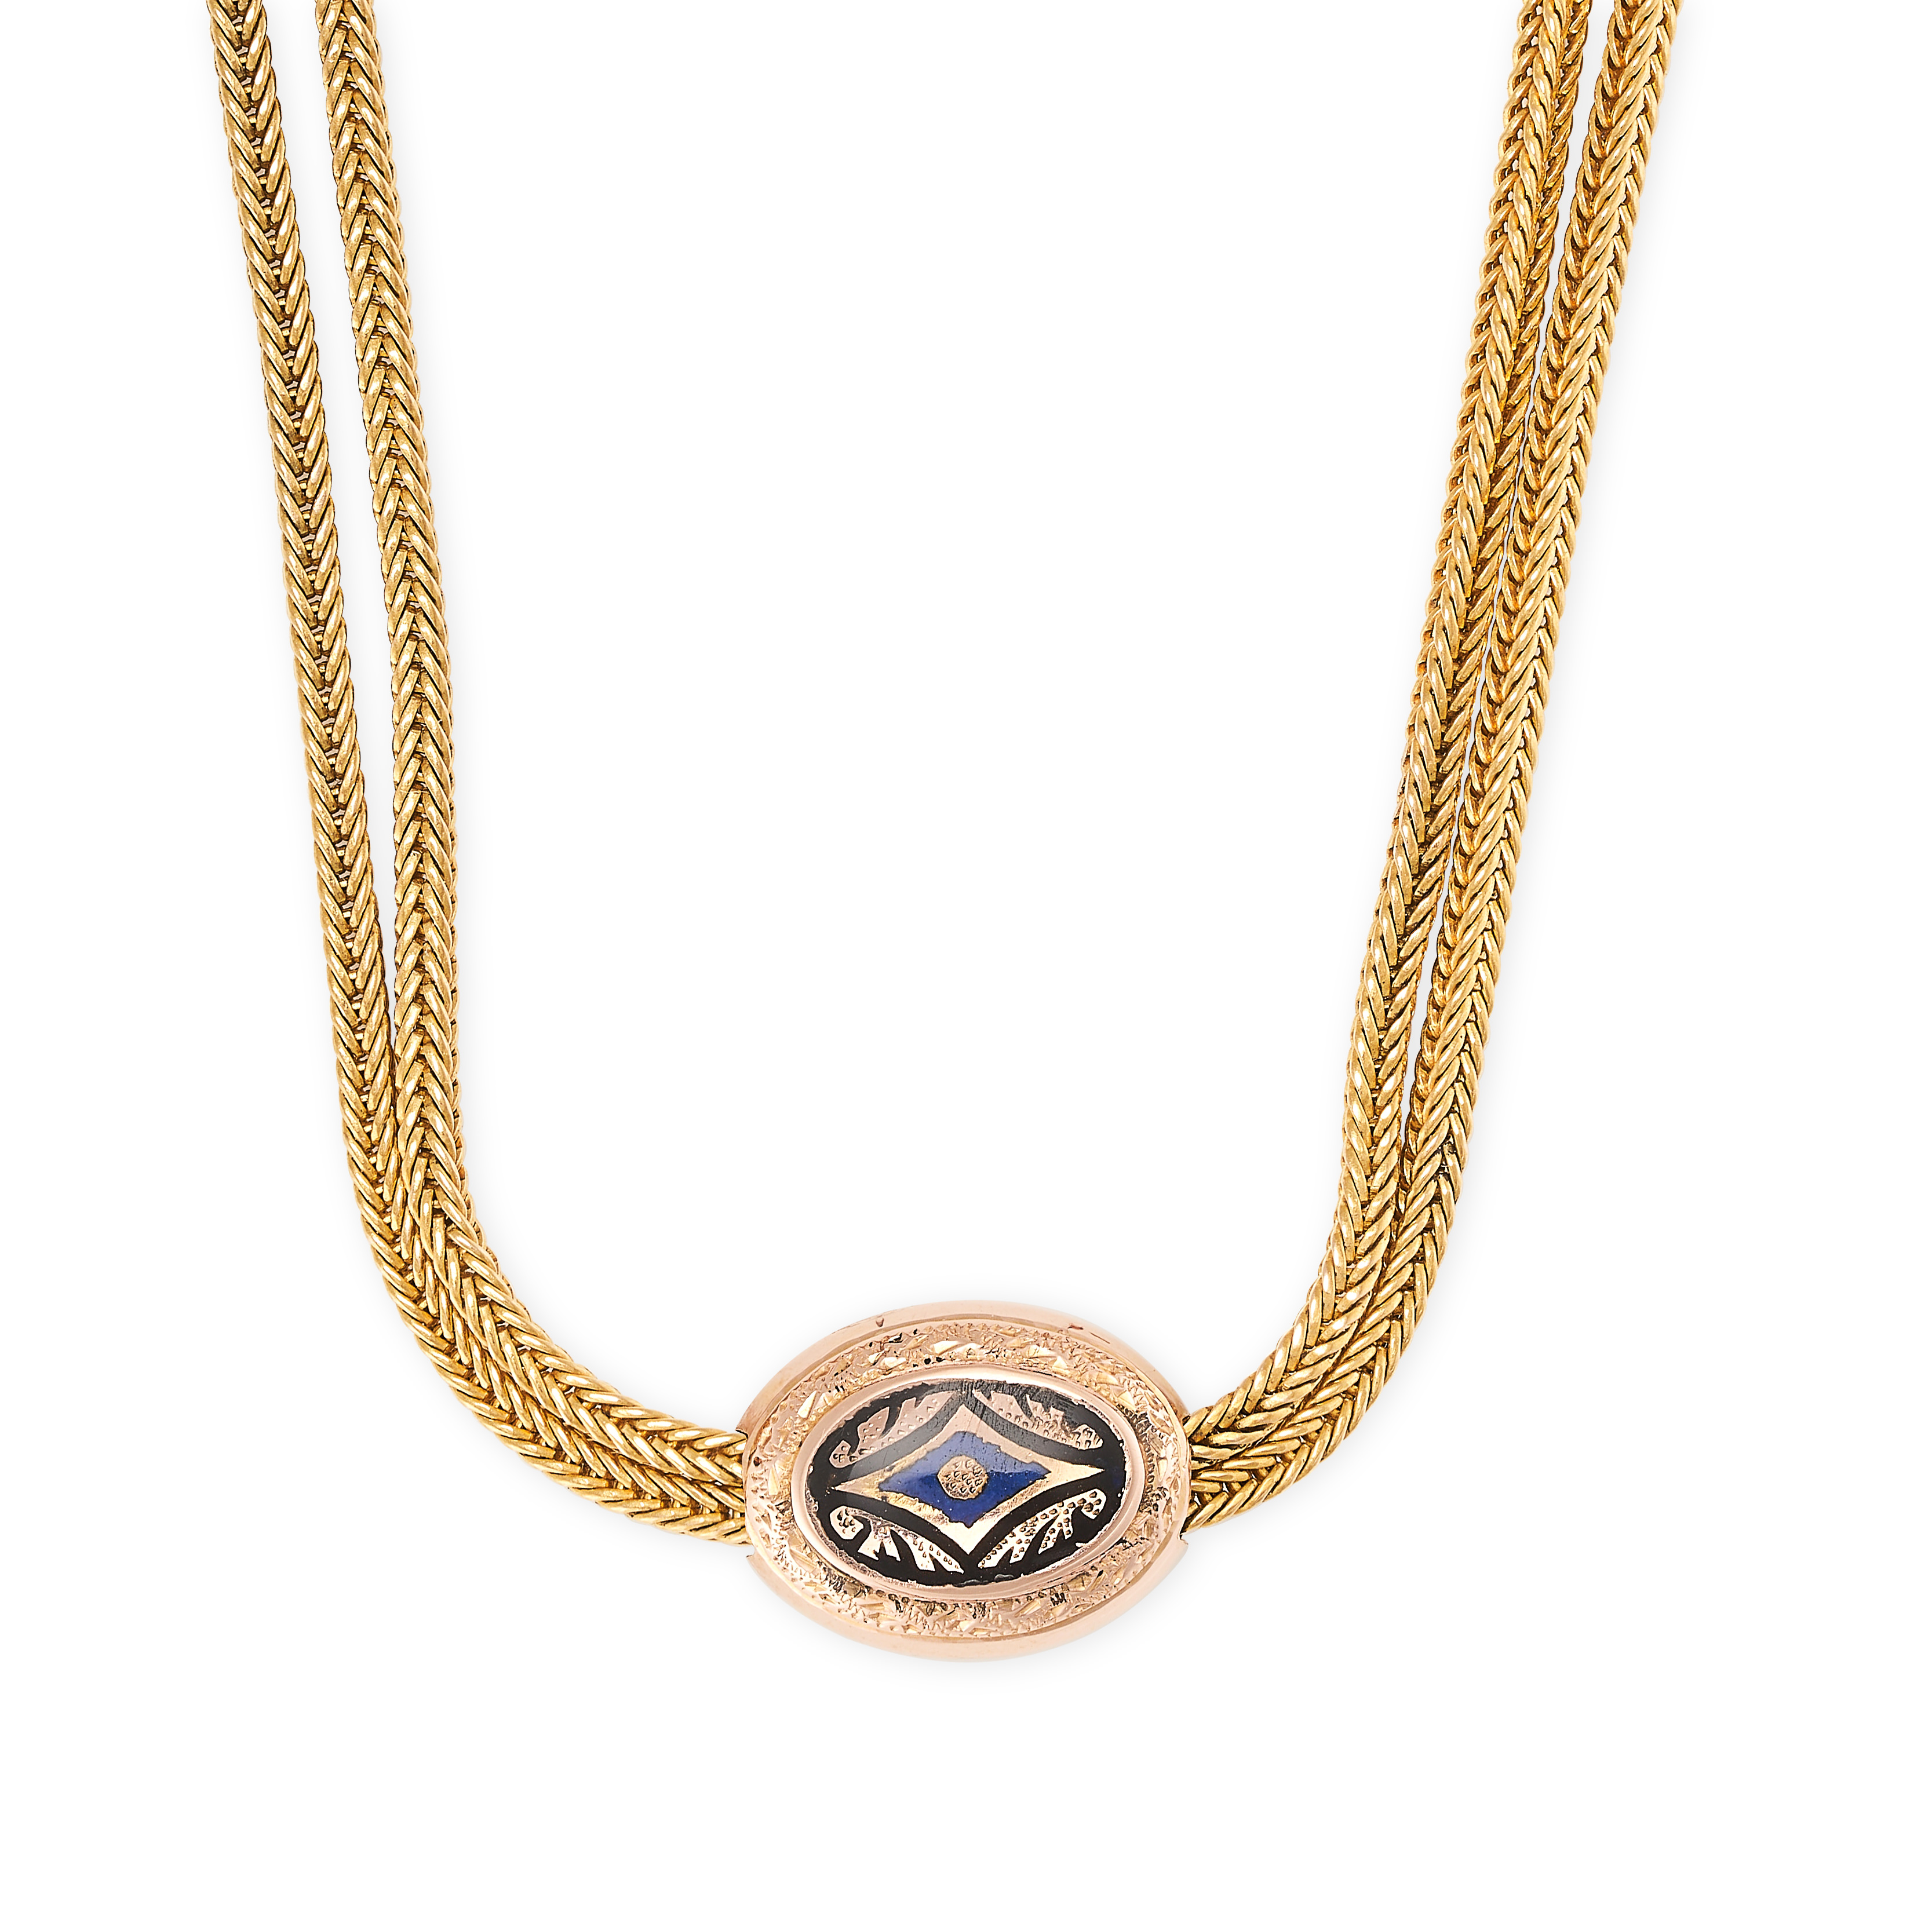 AN ANTIQUE GOLD NECKLACE in yellow gold, comprising two fancy link chains accented by an articulated